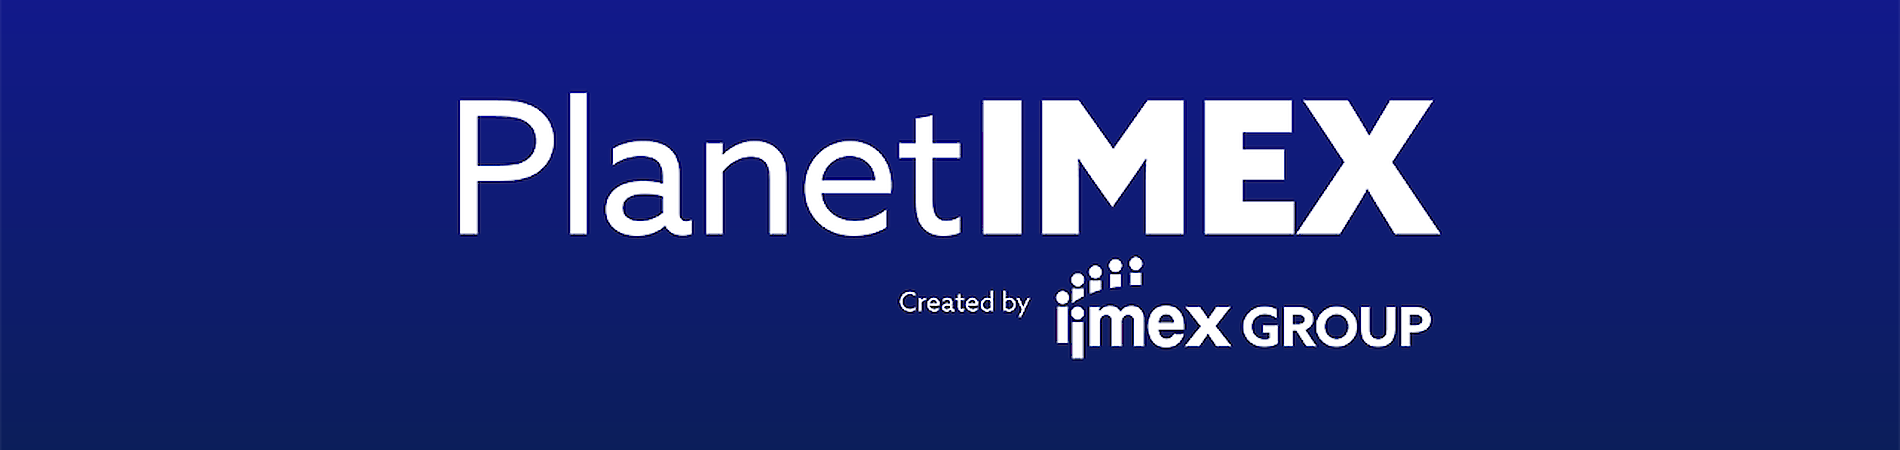 Planet IMEX visual with white lettering on blue background